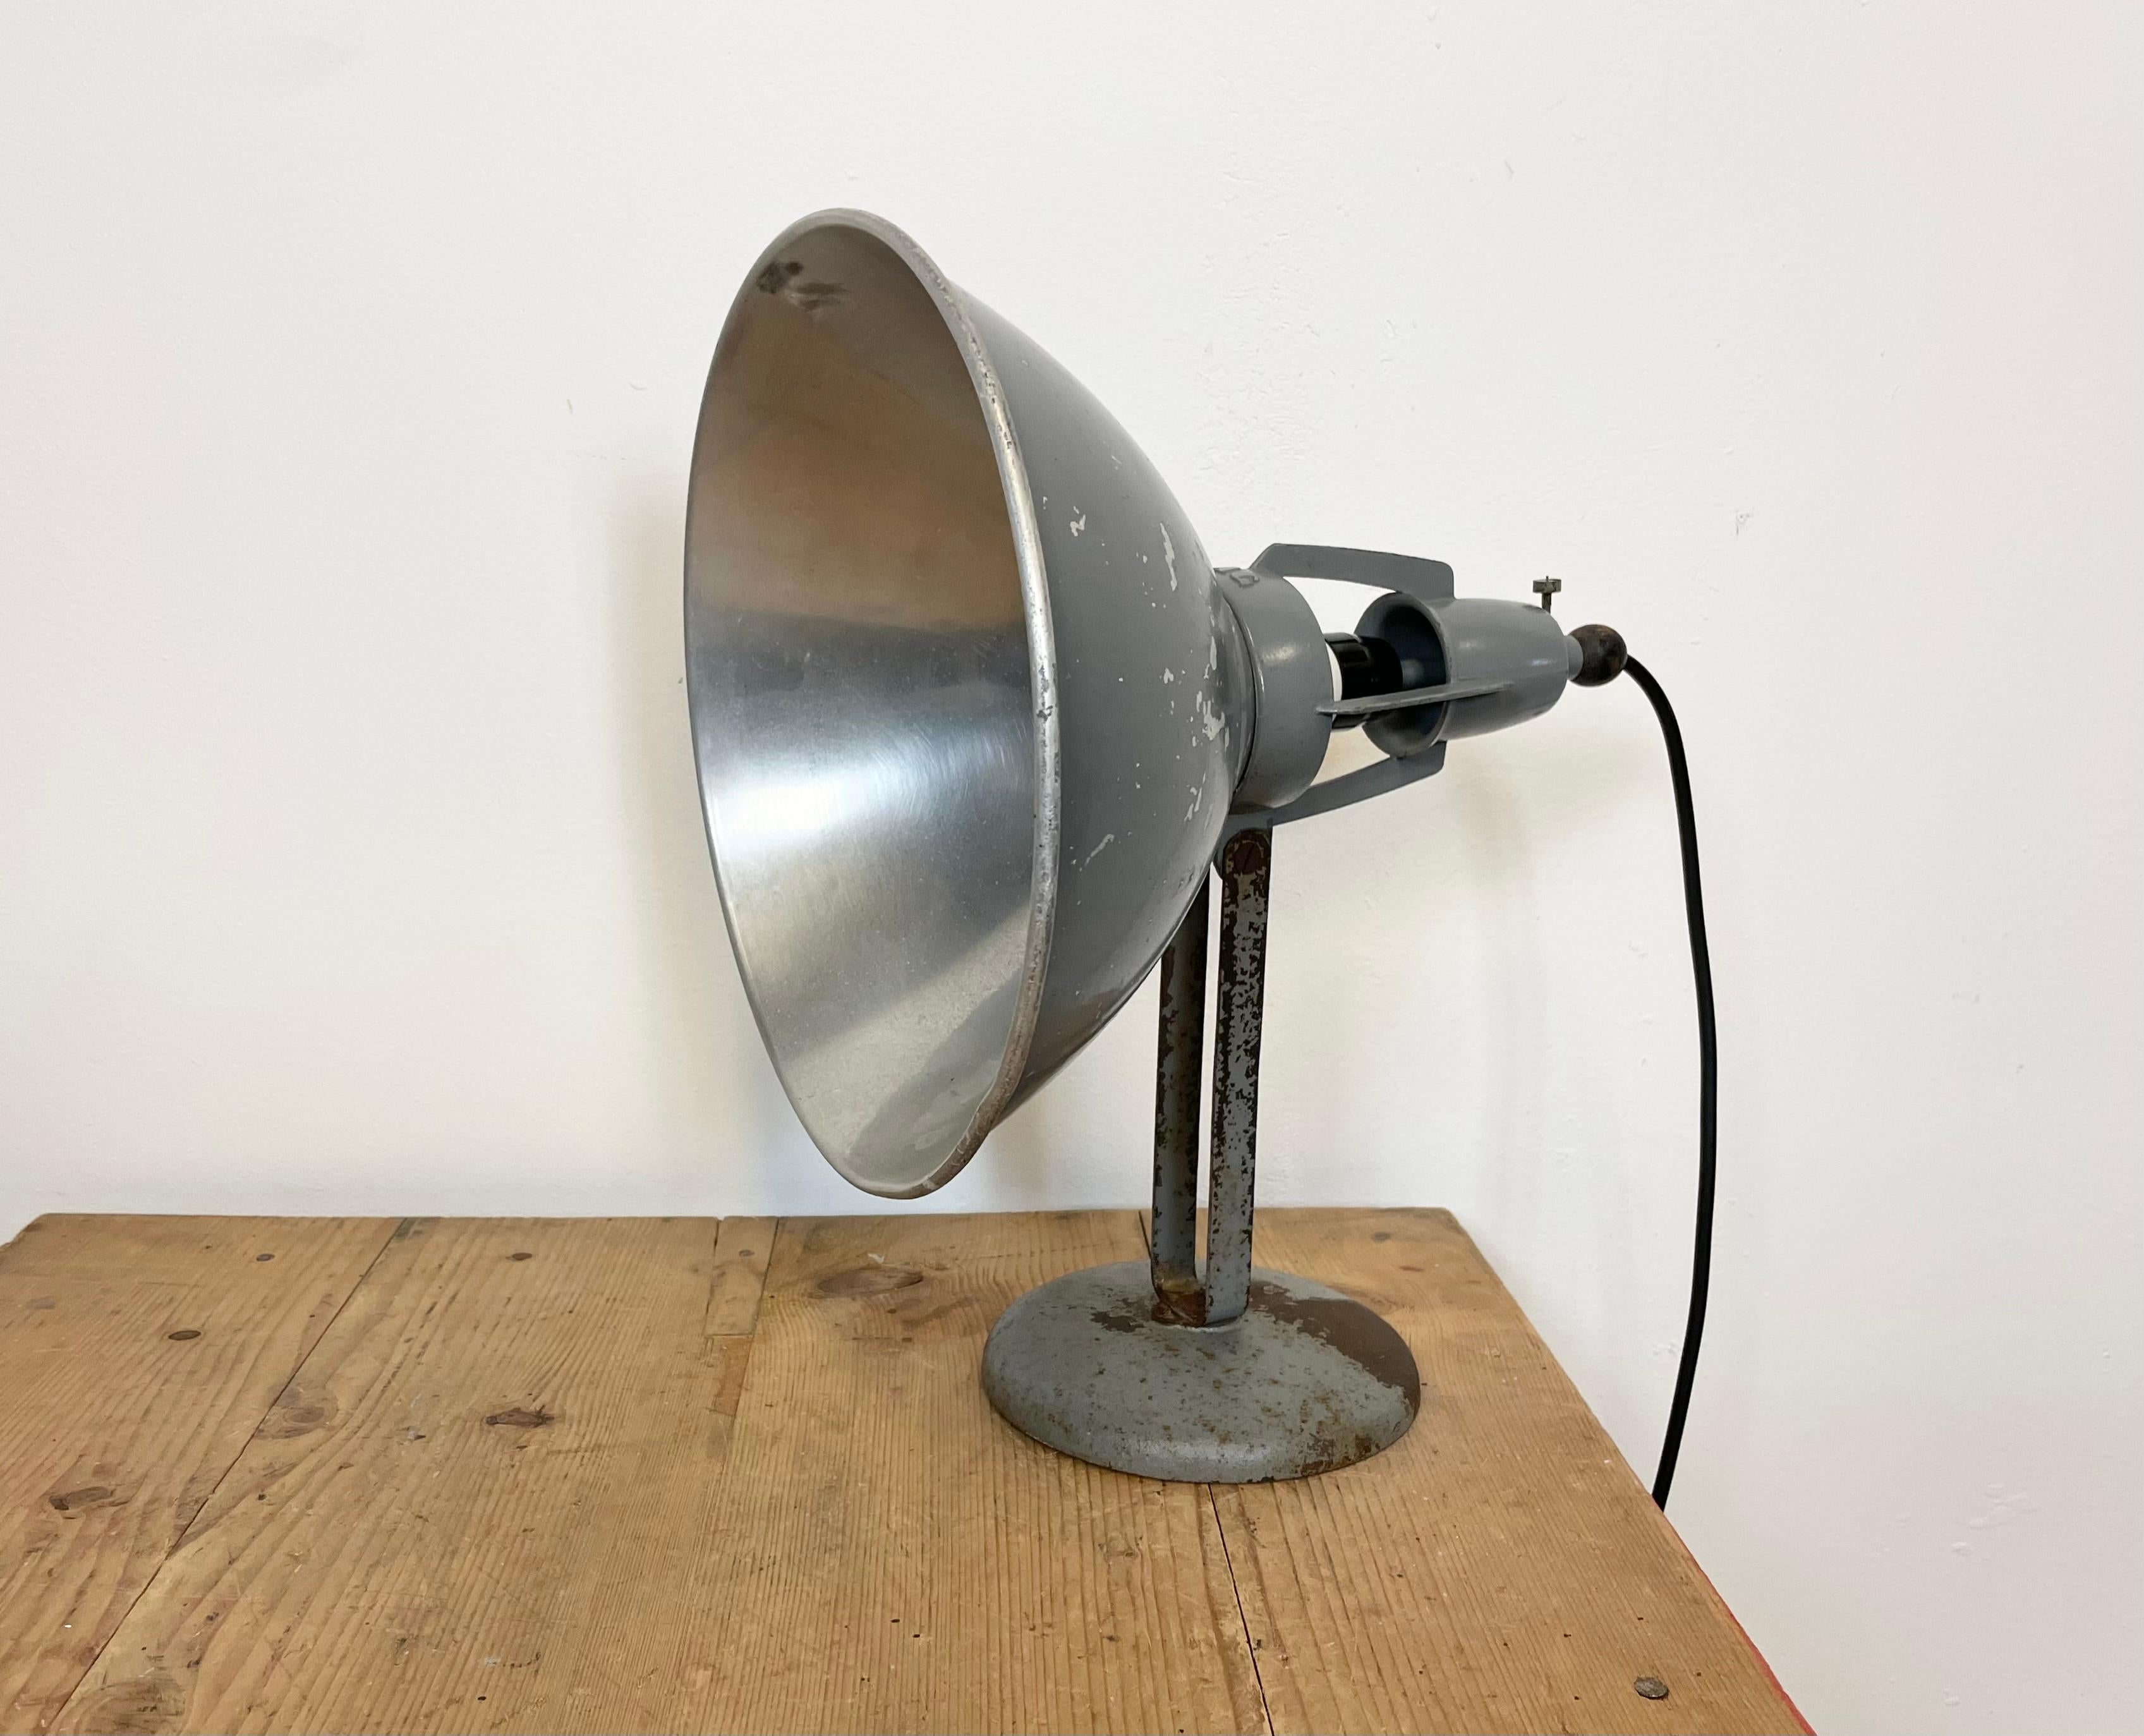 - Industrial table lamp manufactured in Switzerland by BAG Turgi during the 1950s
- Iron base and adjustable aluminum shade
- New porcelain socket requires E 27 light bulbs
- New wire.